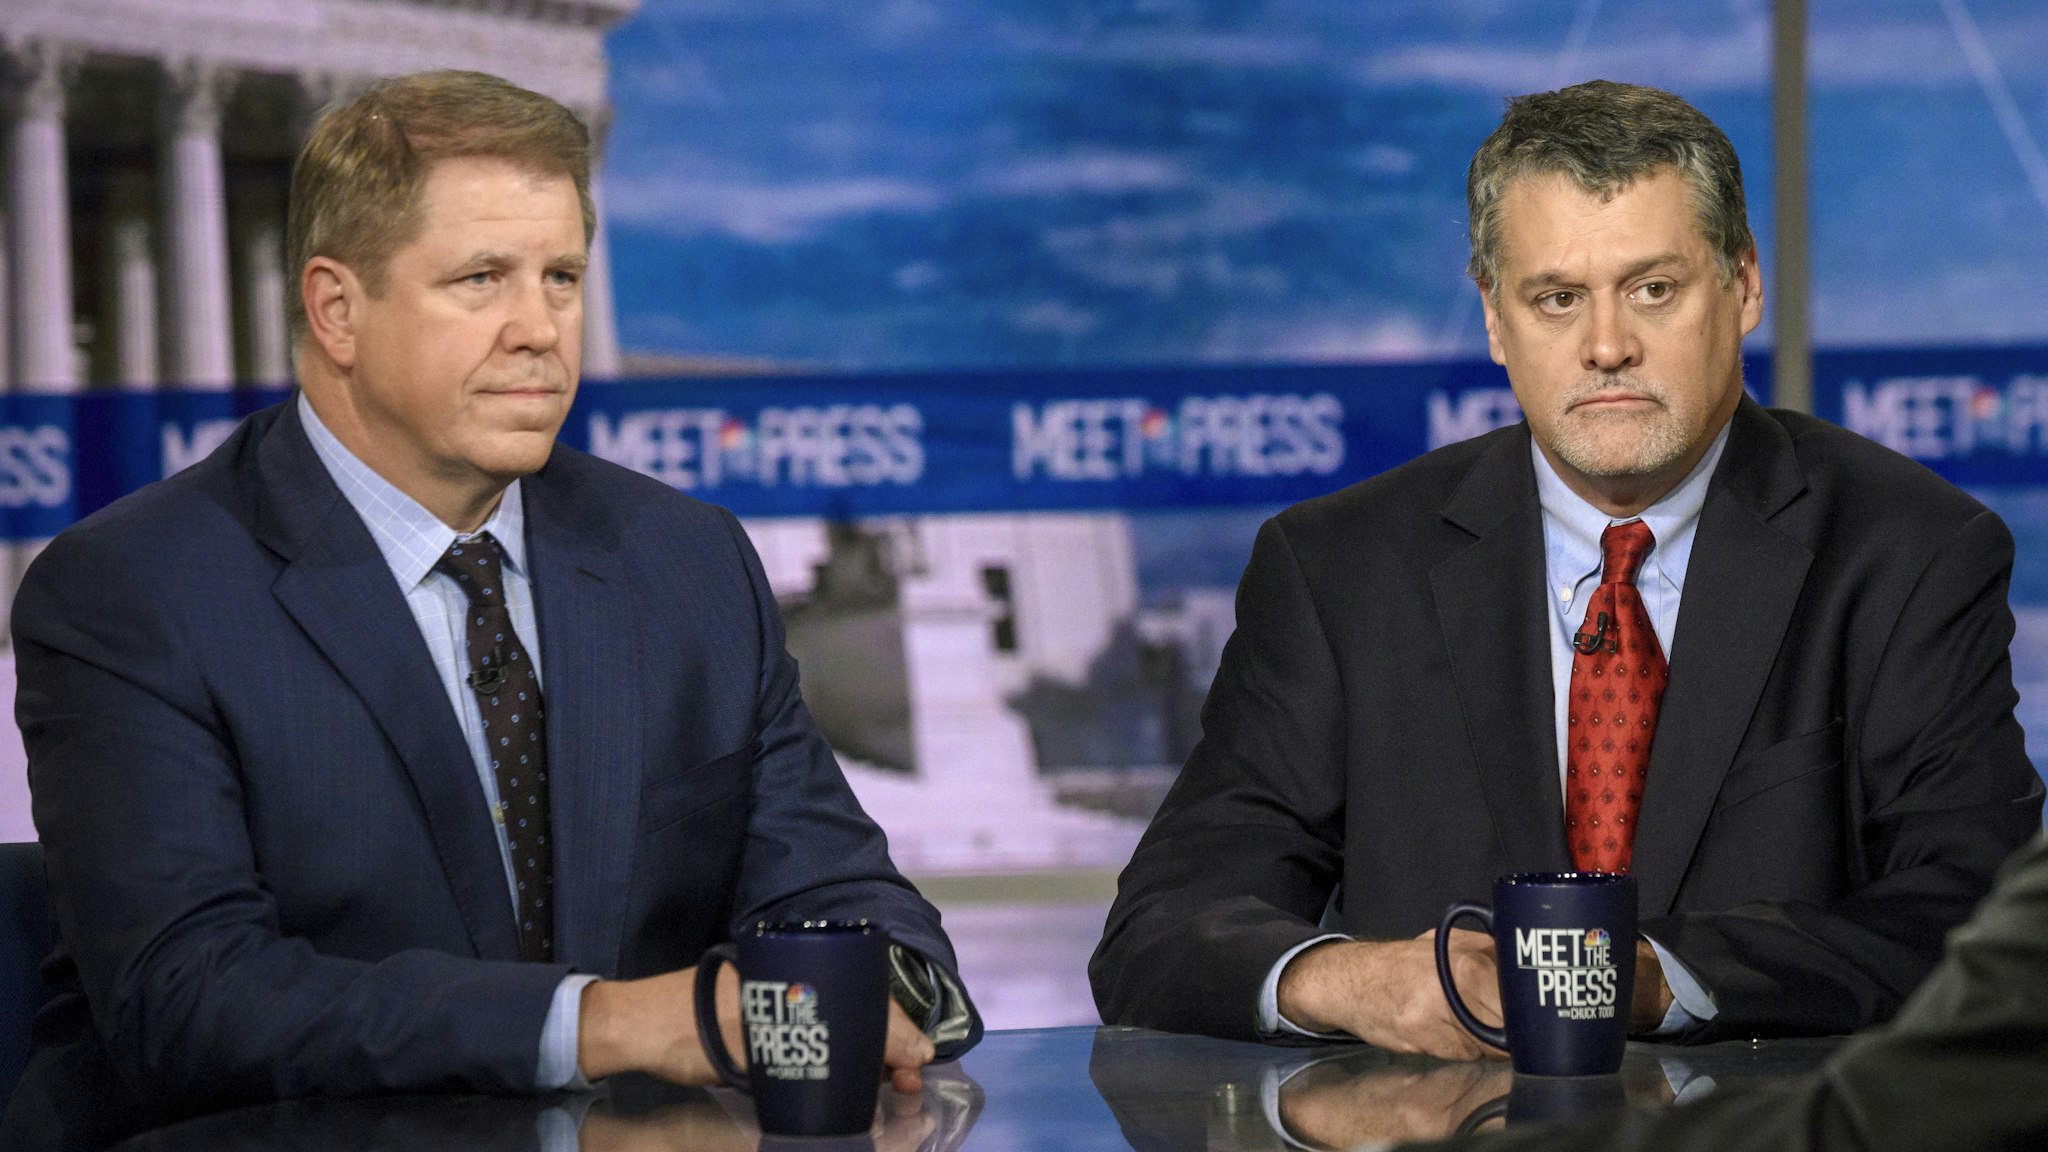 Peter Fritsch and Glenn Simpson, Founders, Fusion GPS; Co-Authors, Crime in Progress: Inside the Steele Dossier and the Fusion GPS Investigation of Donald Trump appear on Meet the Press" in Washington, D.C., Sunday, November 24, 2019.